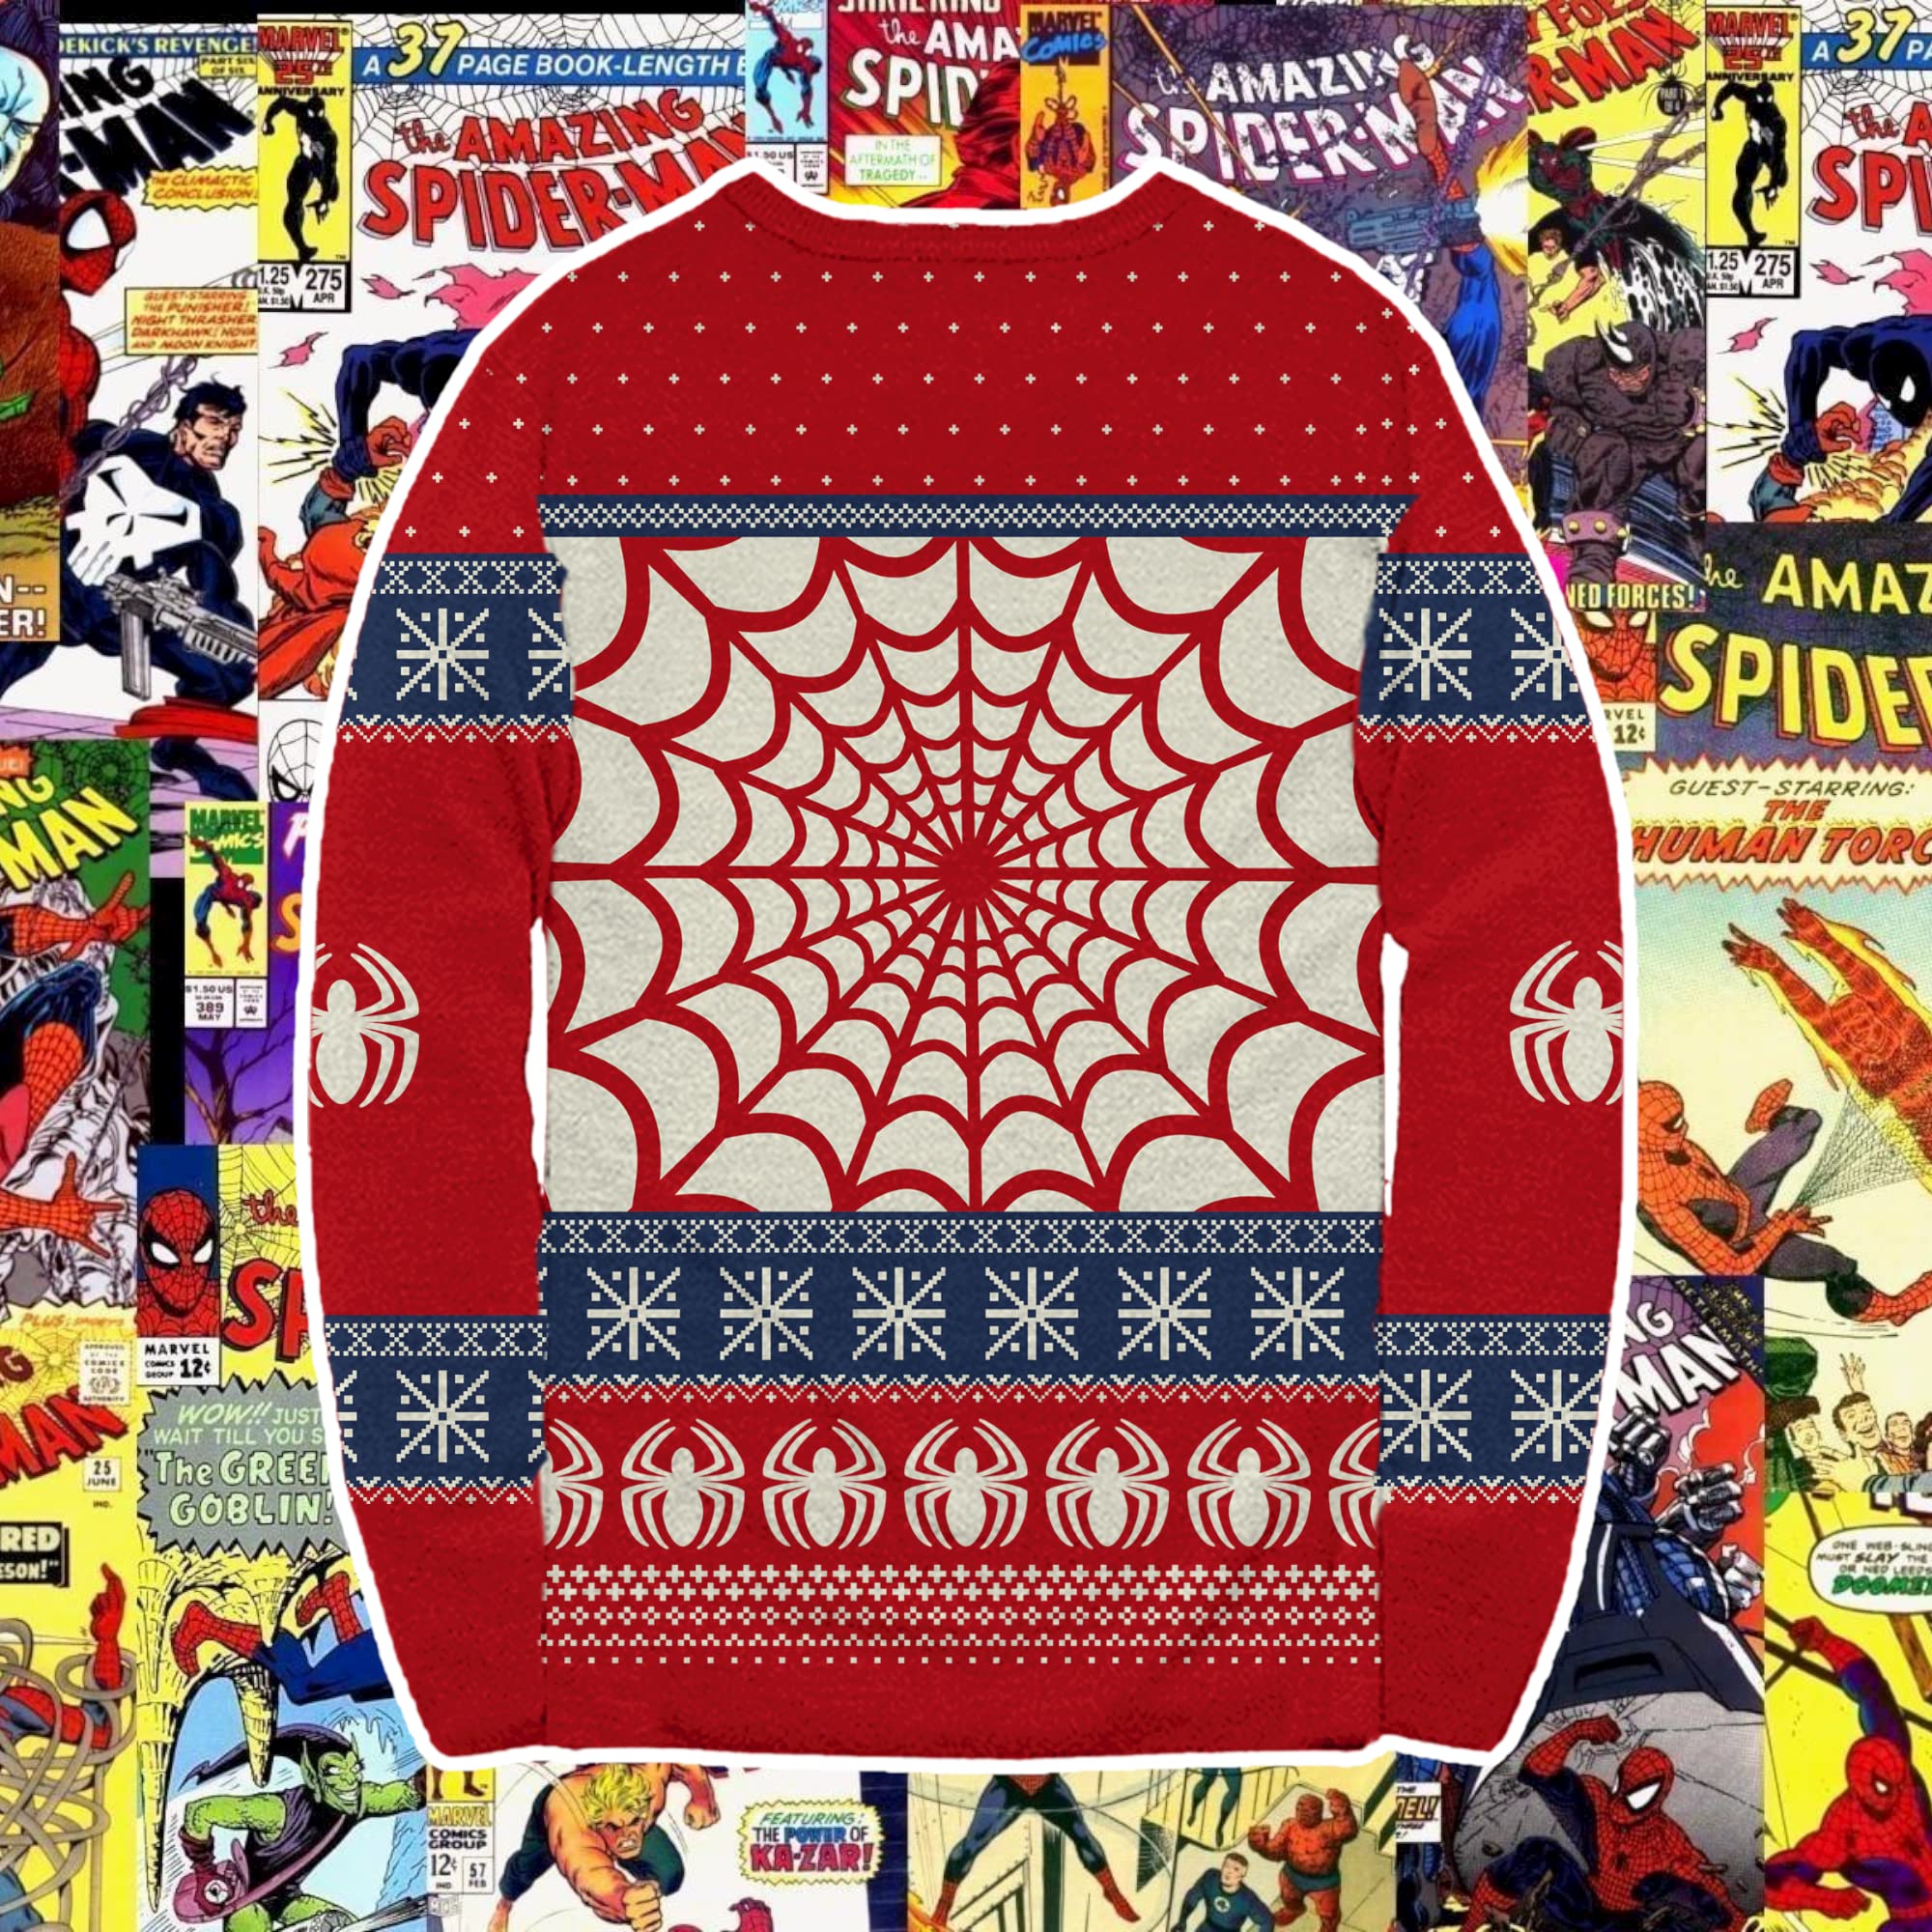 Marvel Spider- Man Symbol and Webs Offcially Licesned Adult Knit Holiday Ugly Christmas Sweater